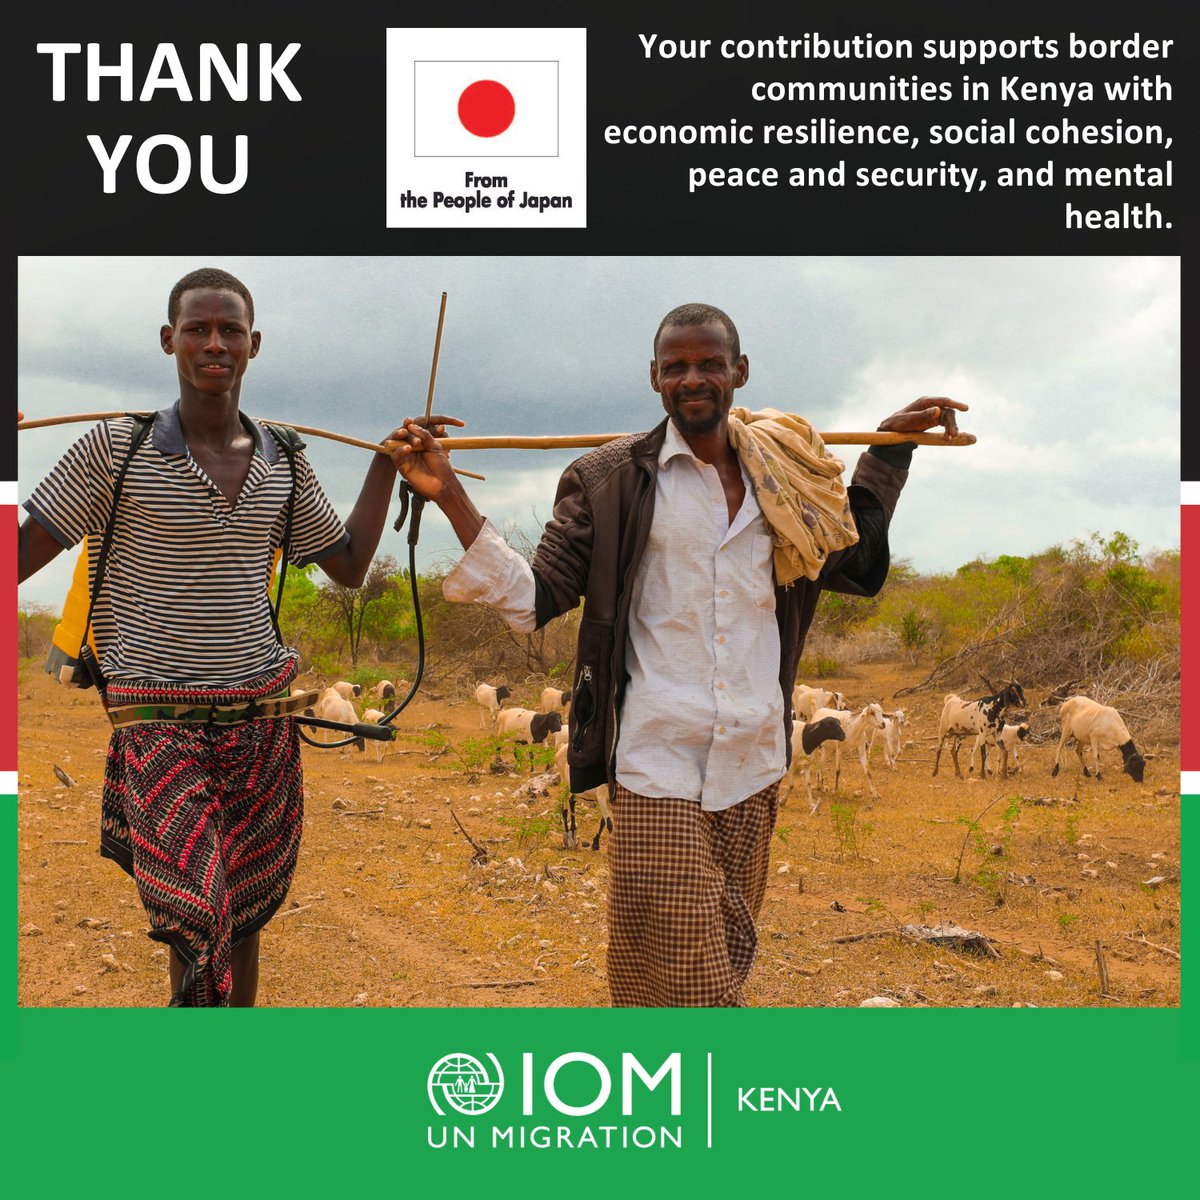 IOM #Kenya is supporting border communities in 🇰🇪 affected by insecurity & climate displacement, with peace building initiatives, livelihoods & mental health benefitting over 2⃣0⃣0⃣0⃣ people, thanks to the new partnership with the Government of Japan 🇯🇵  @MofaJapan_en